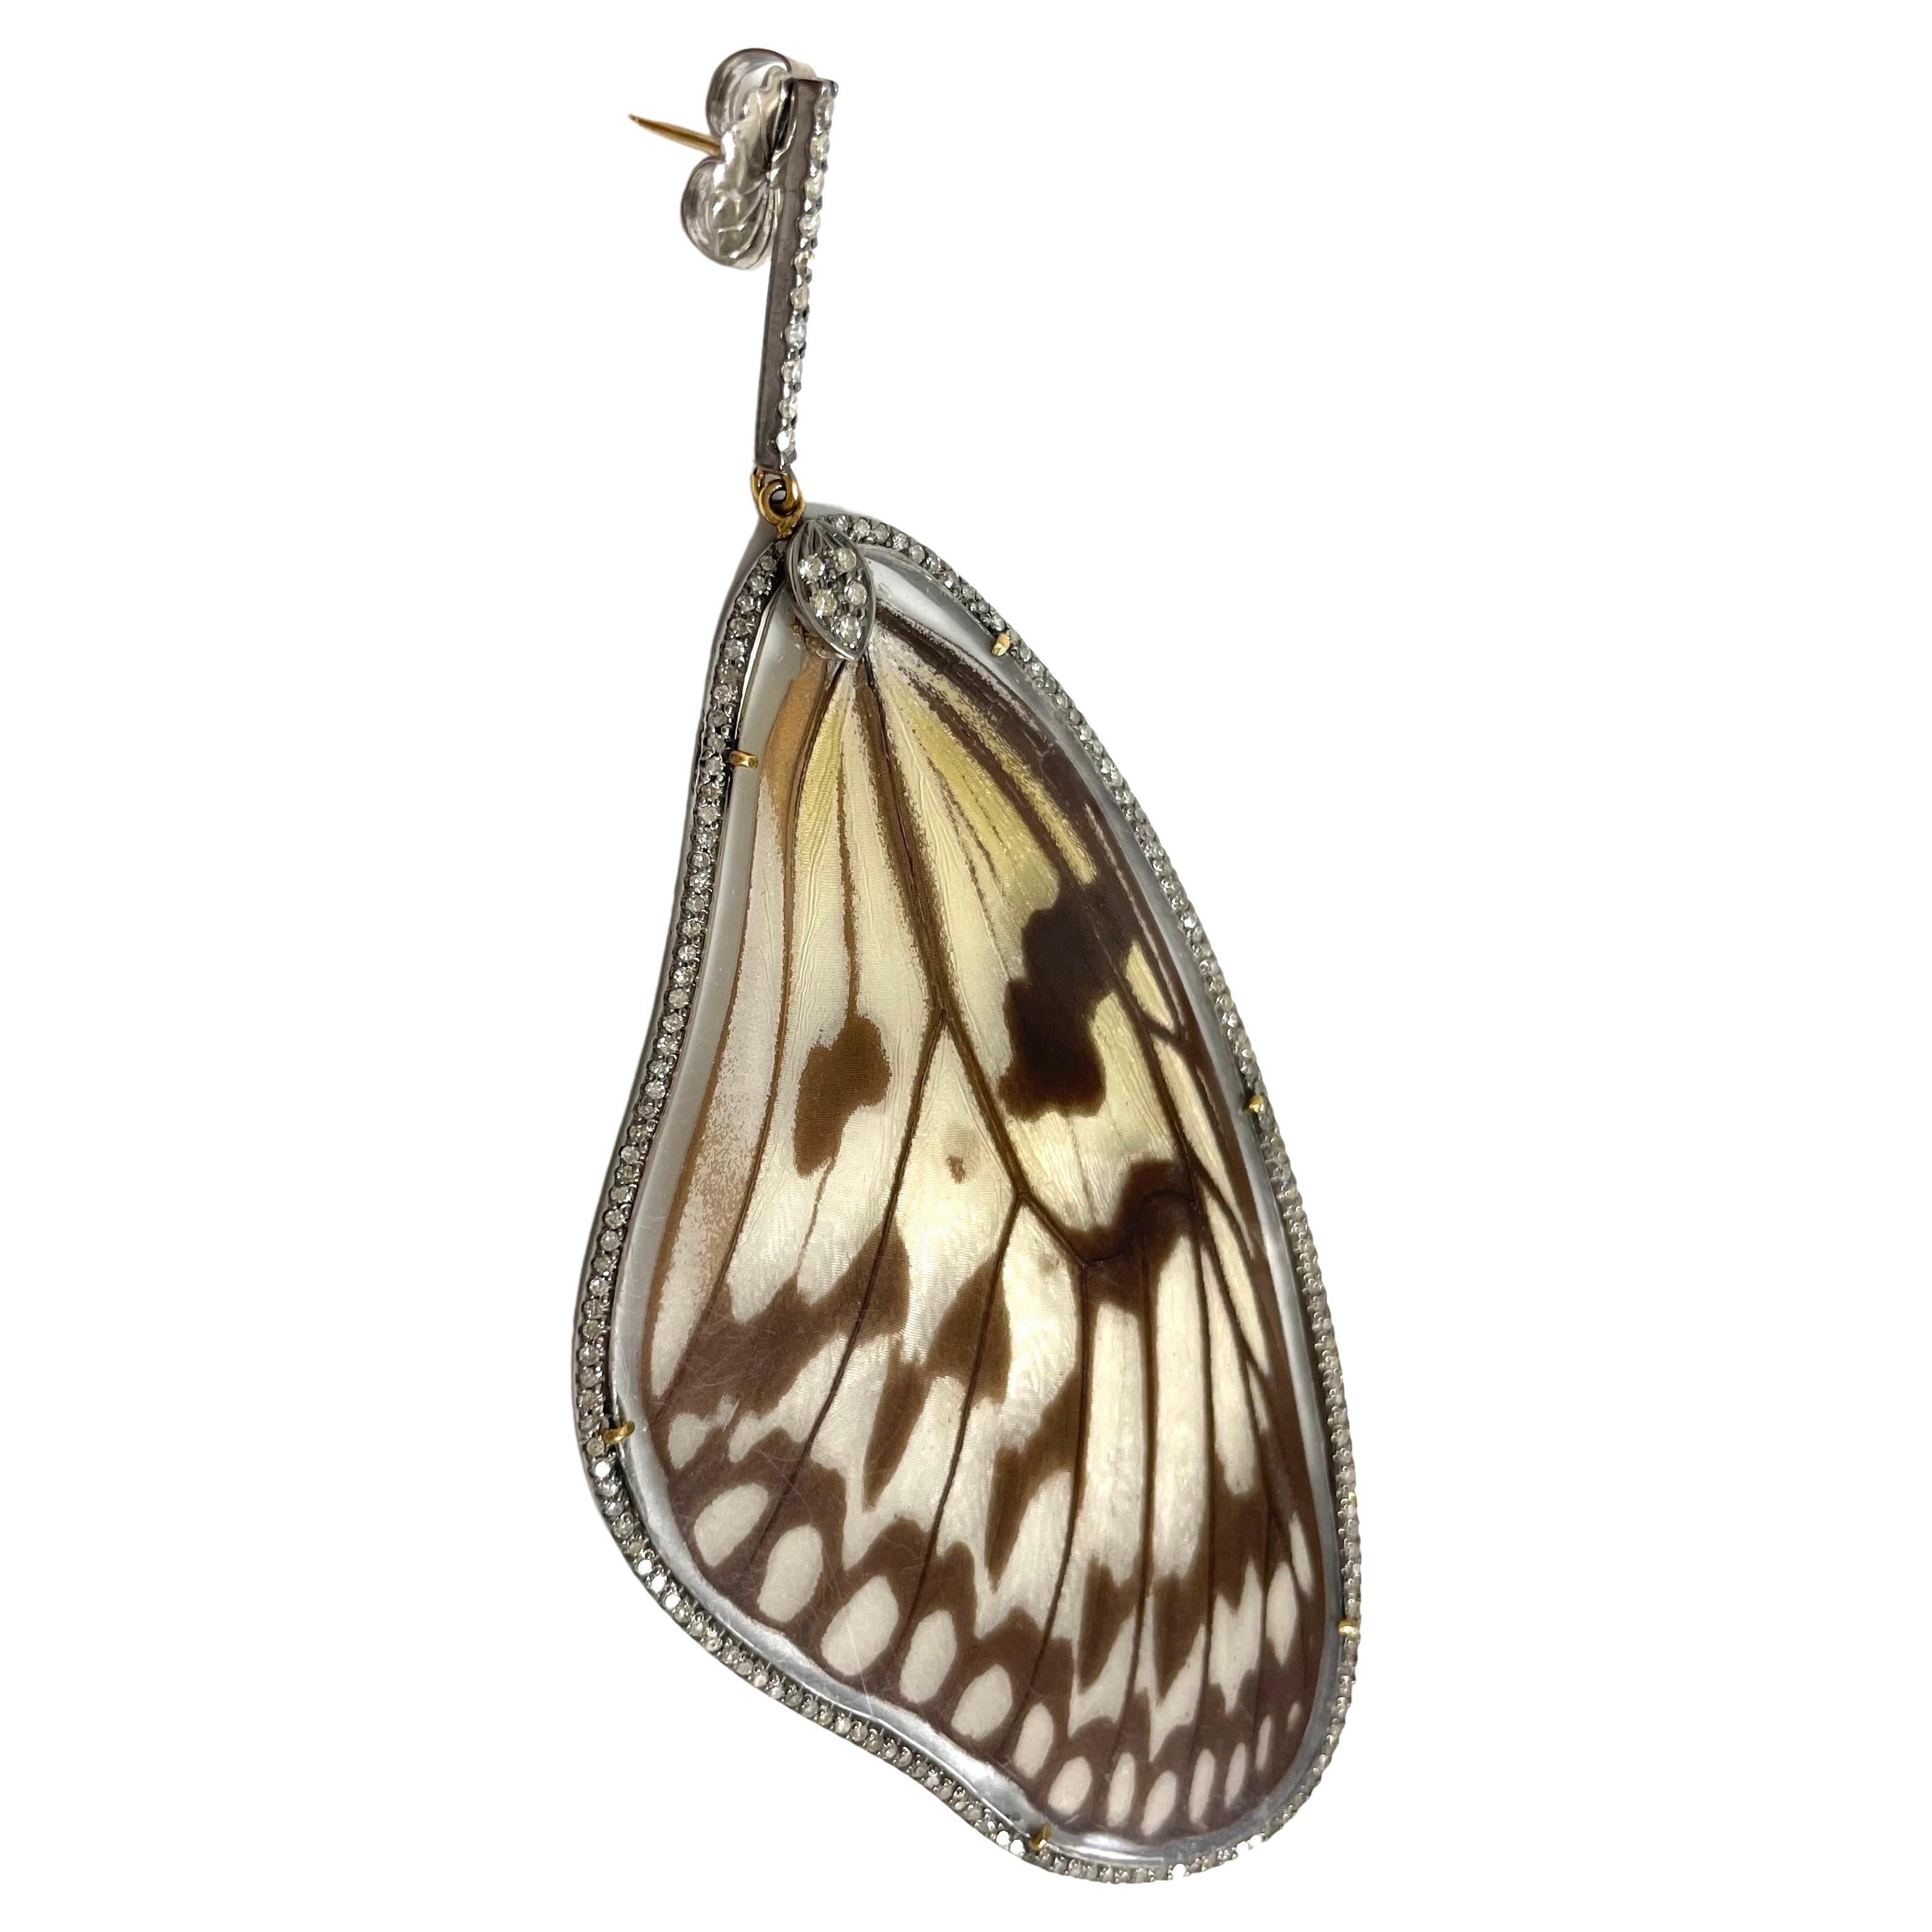 Description
Give yourself wings and embody the magical bedazzling beauty of butterflies while making an effortless statement with these unique, large and prominent, yet remarkably lightweight and comfortable one-of-a-kind earrings. Could they get